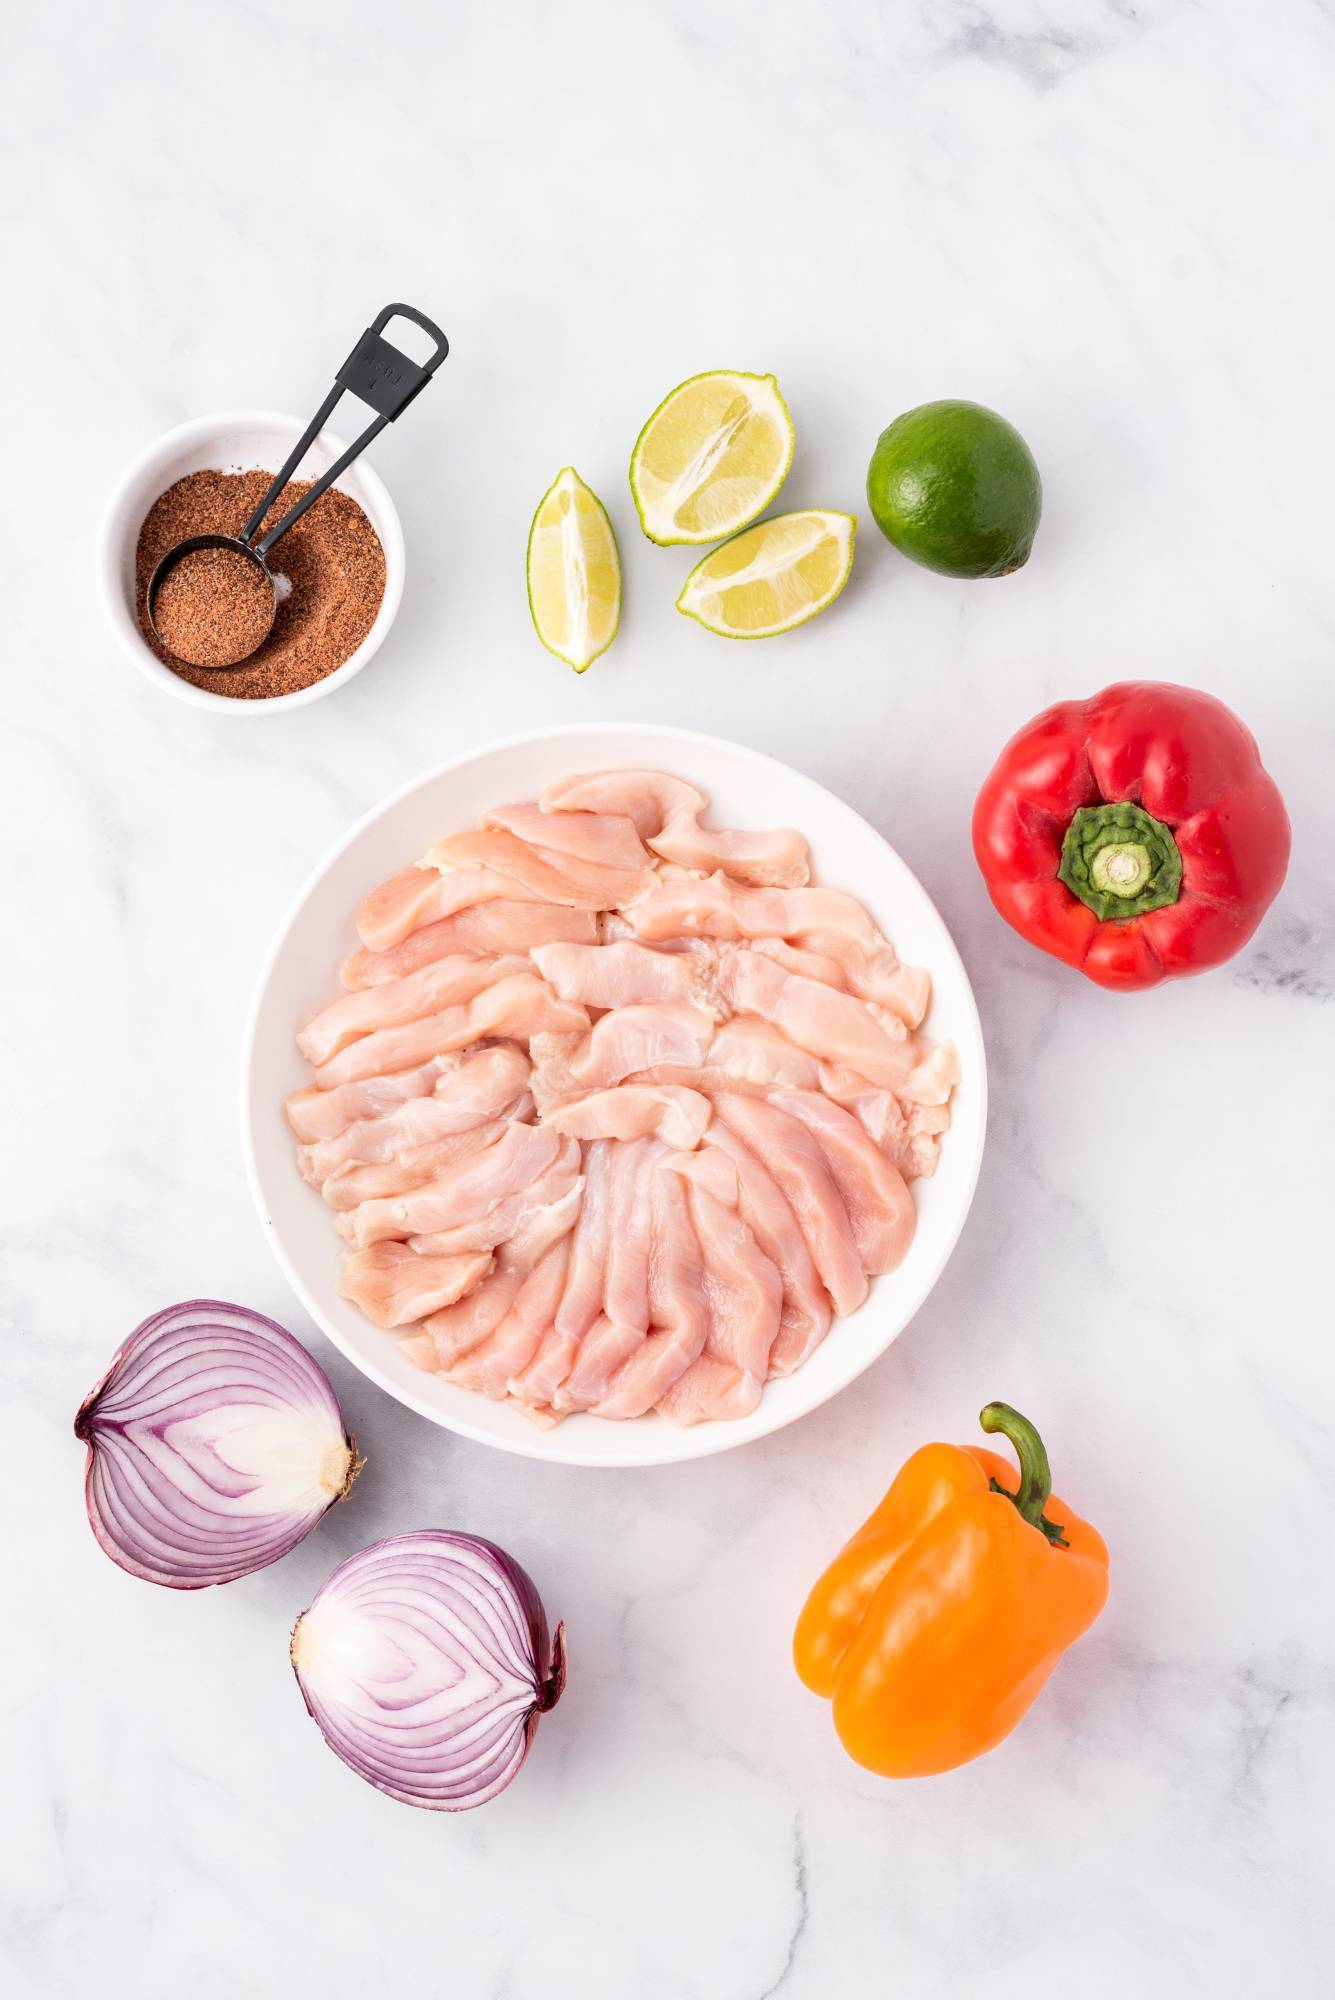 Ingredients for sheet pan chicken fajitas including sliced chicken breast, bell peppers, lime wedges, red onion, and fajita seasoning.